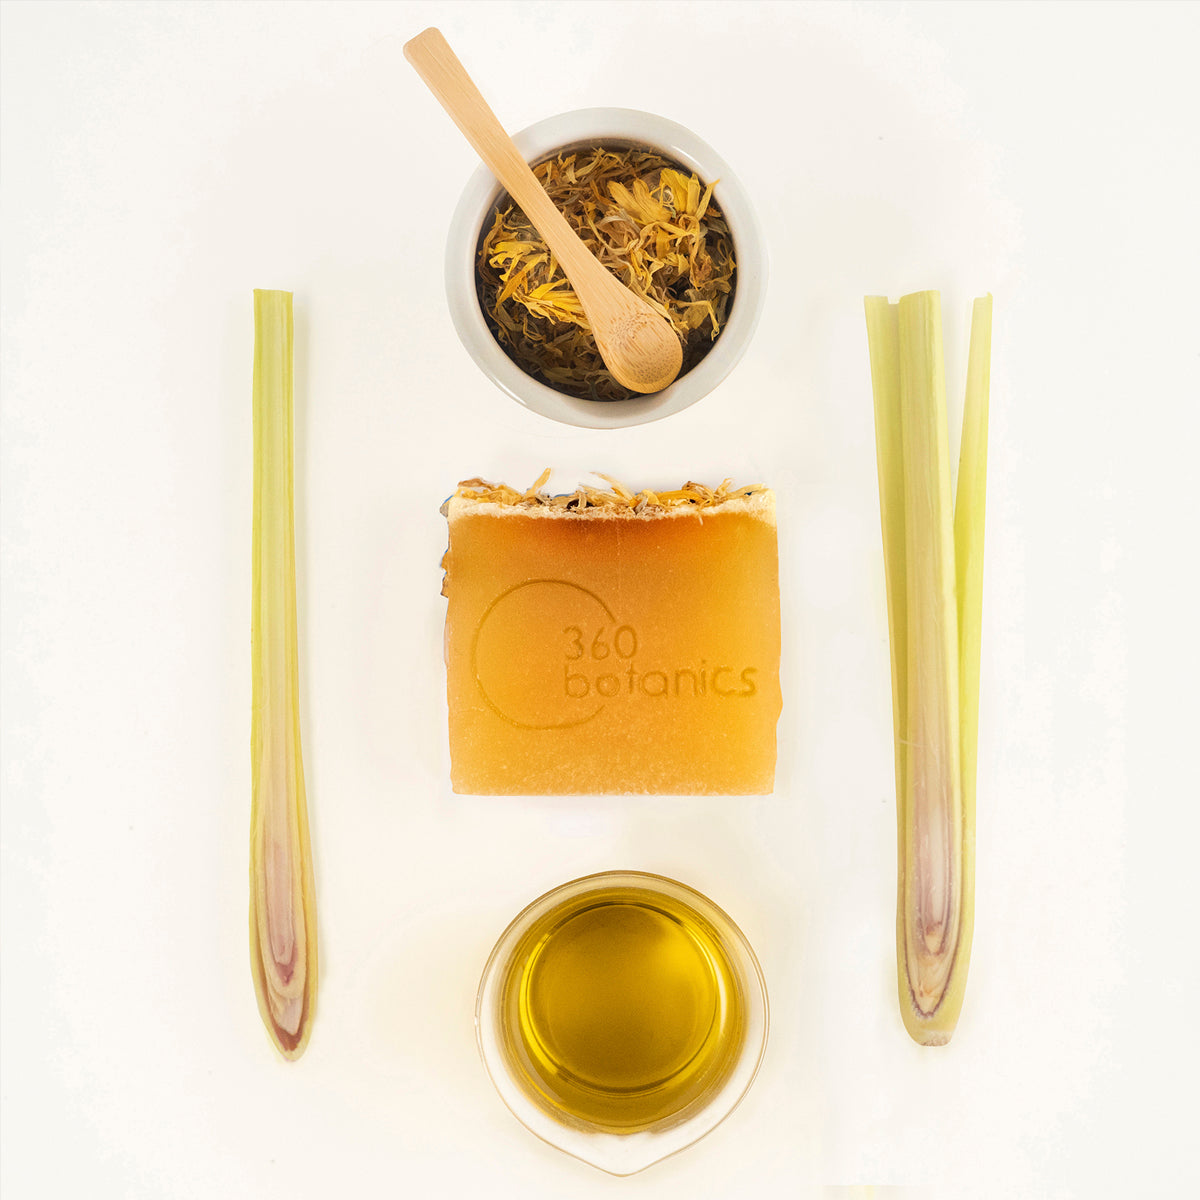 A flat lay composition featuring a 360 Botanics branded soap bar, a bowl of dried herbs with a wooden spoon, a small dish of oil, and two lemongrass stalks, all arranged on a white surface.